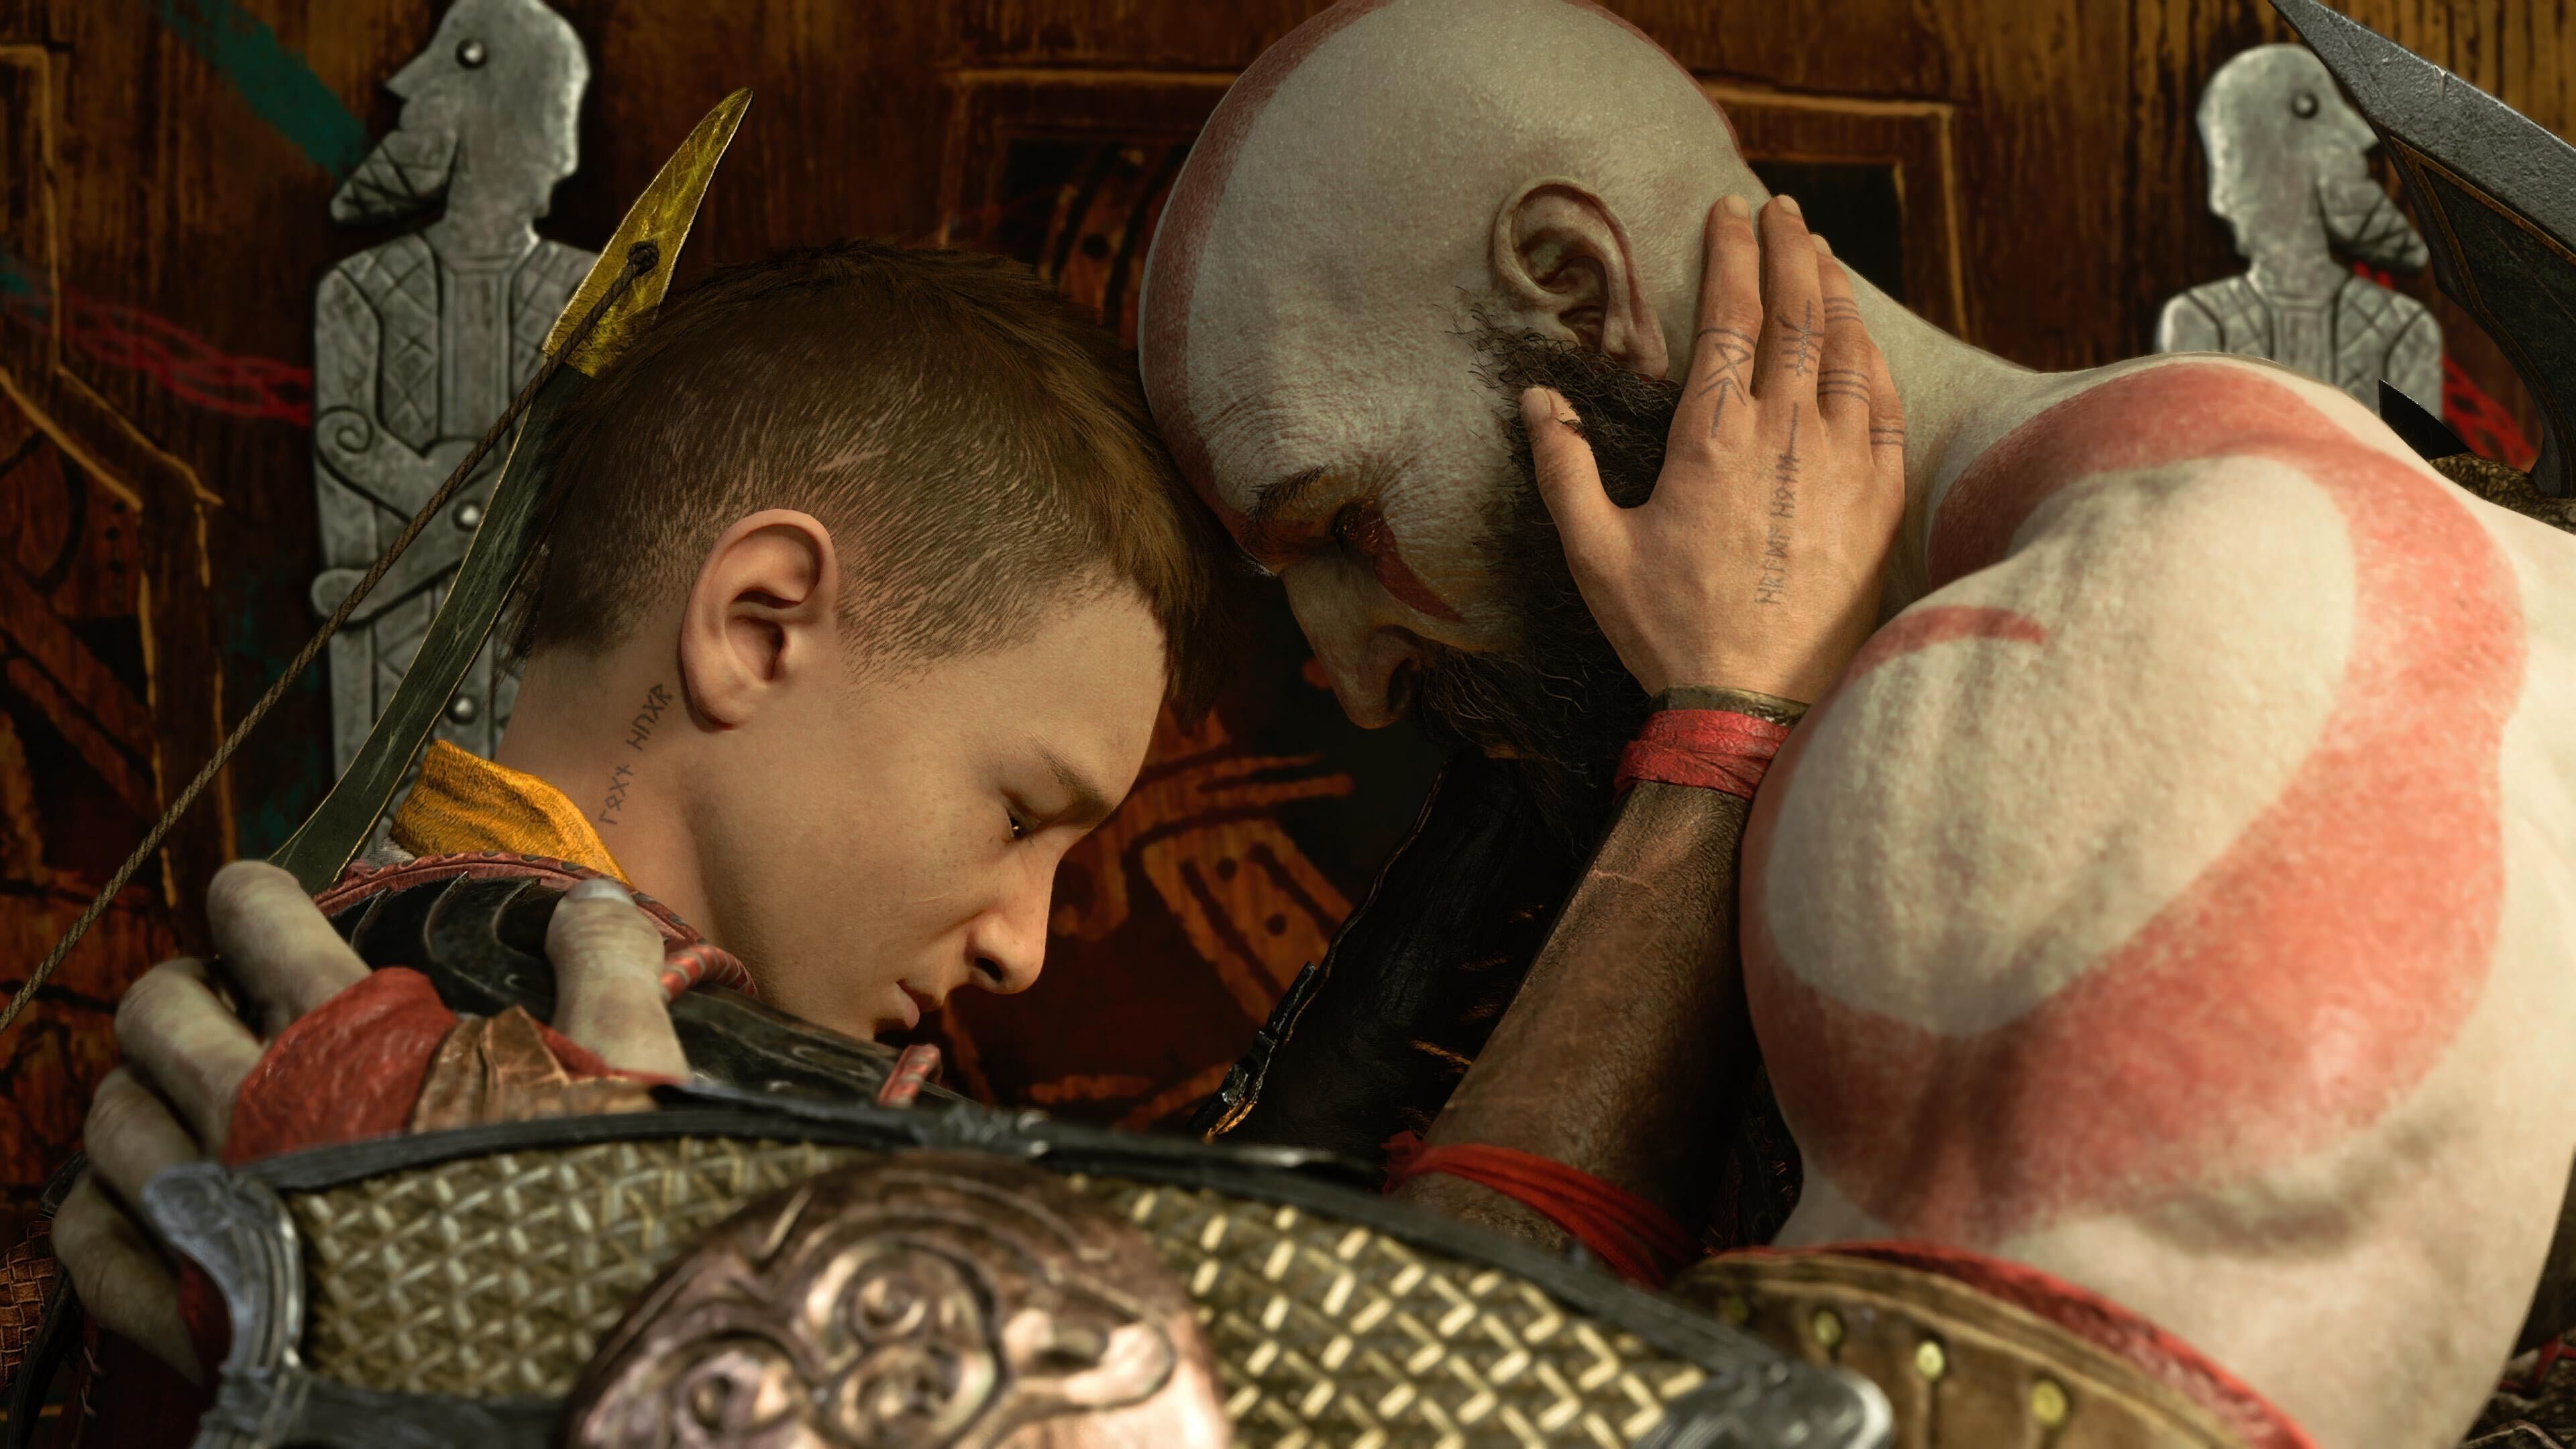 I loved Kratos and Atreus' story, but all the other story threads God of War Ragnarök spun were too much for one game.